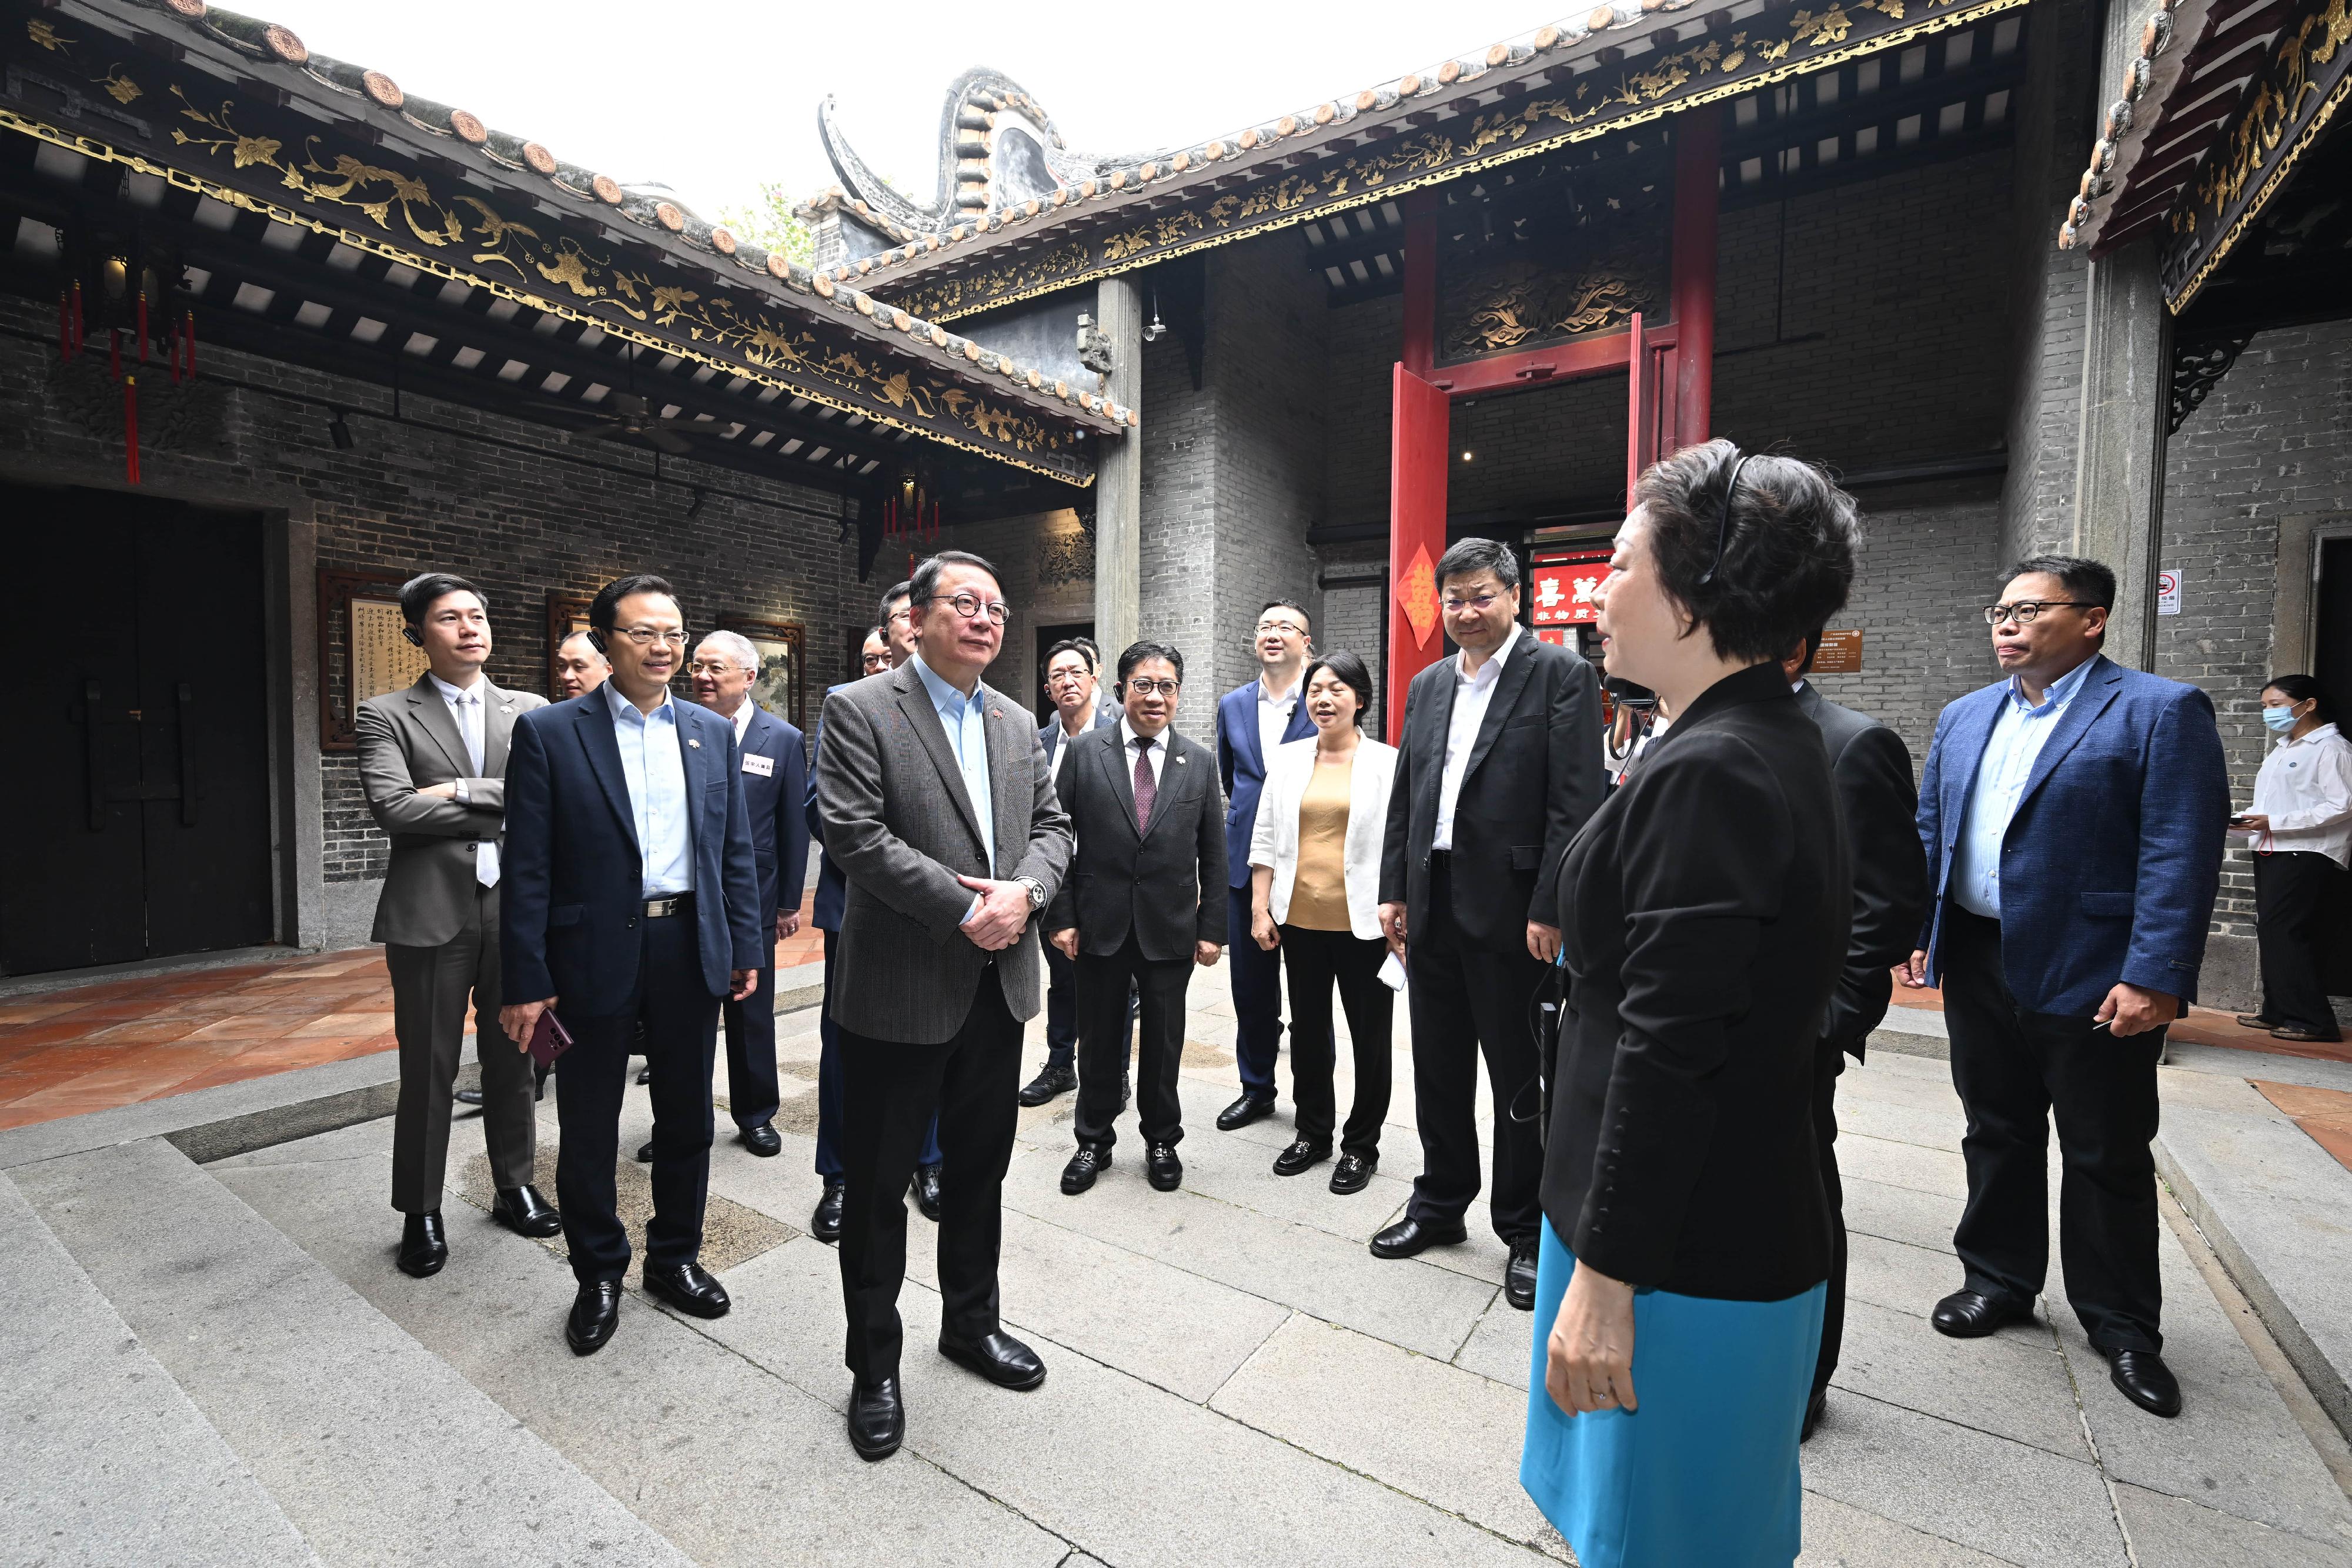 The delegation of the Hong Kong Special Administrative Region Government and the Legislative Council (LegCo) led by the Chief Executive, Mr John Lee, conducted their third-day visit in the Guangdong-Hong Kong-Macao Greater Bay Area today (April 23). Photo shows the Chief Secretary for Administration, Mr Chan Kwok-ki (third left) and LegCo members visiting the Wenhui Lane Marriage House located at the Foshan Lingnan Tiandi.